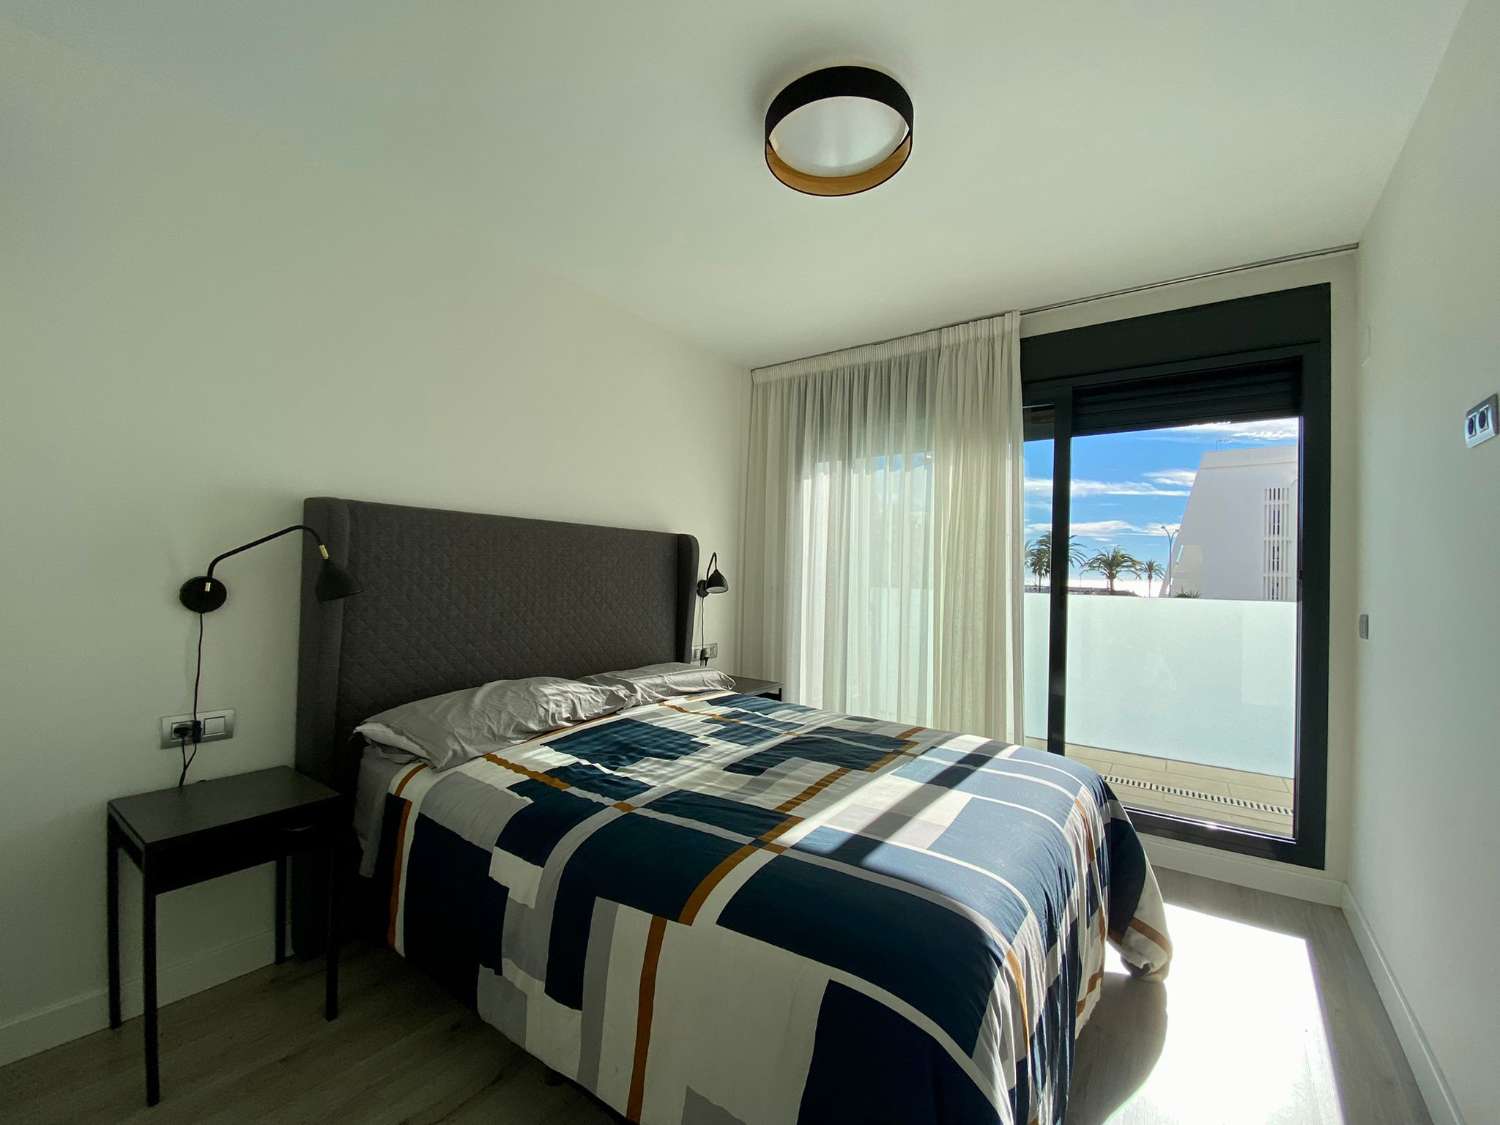 Two-bedroom apartment, with terrace, and community pool next to the beach of Puerto de la Caleta, available for winter